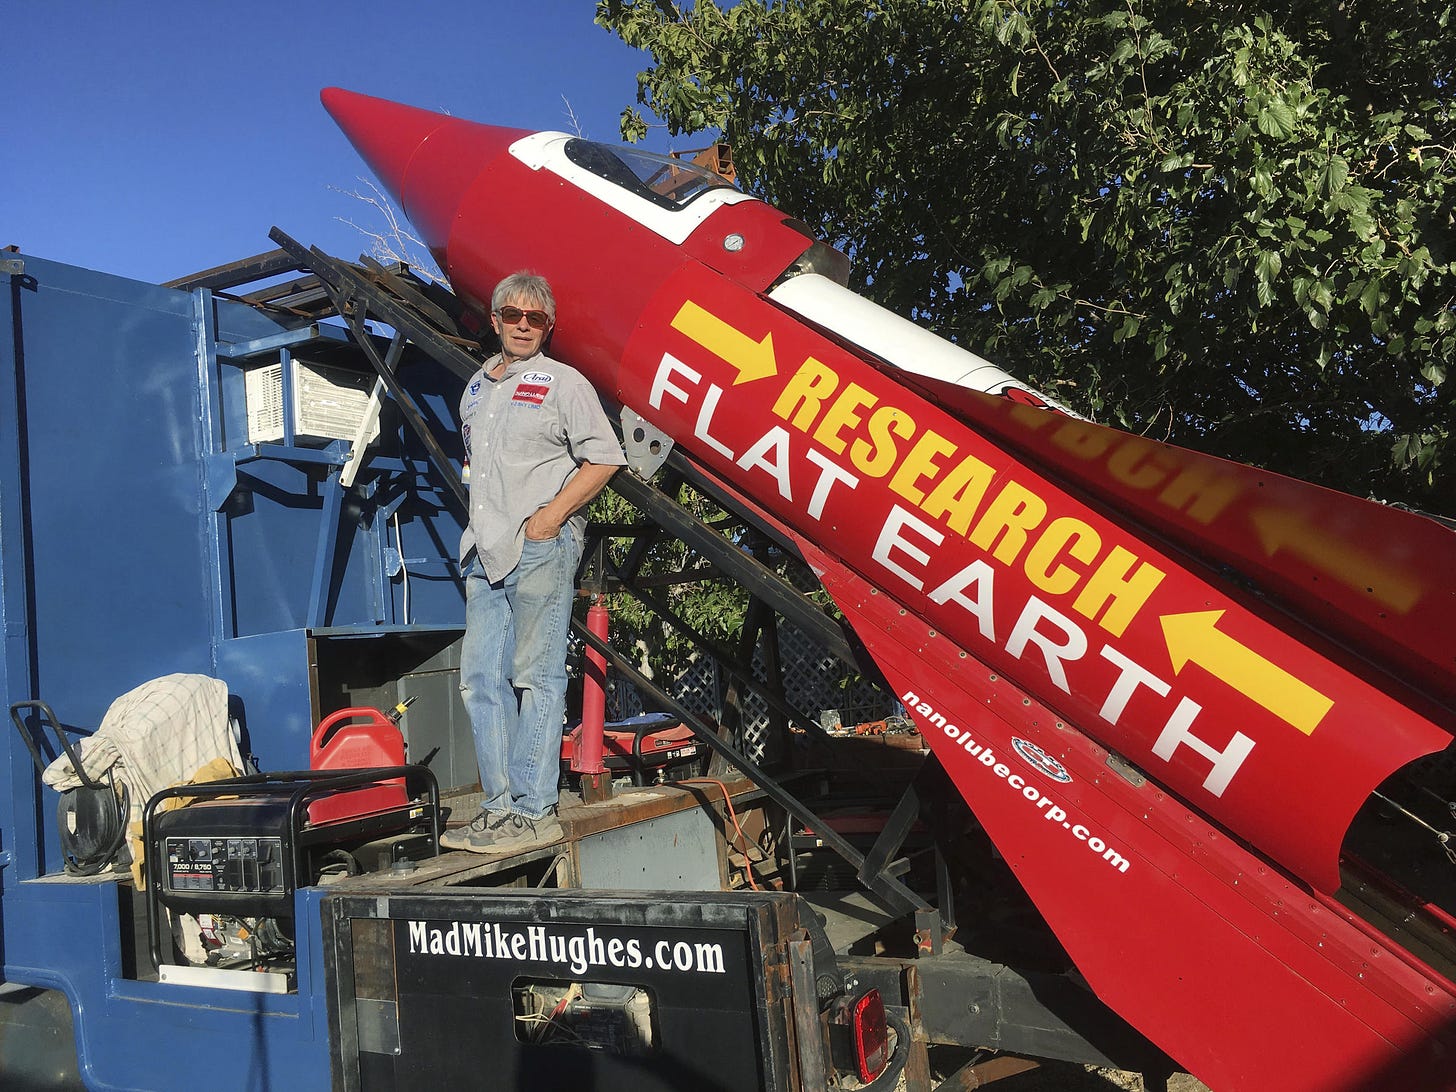 "Mad Mike Hughes" was a Flat Earther who built his own spaceflight rocket. He died in February 2020 from a failed launch.